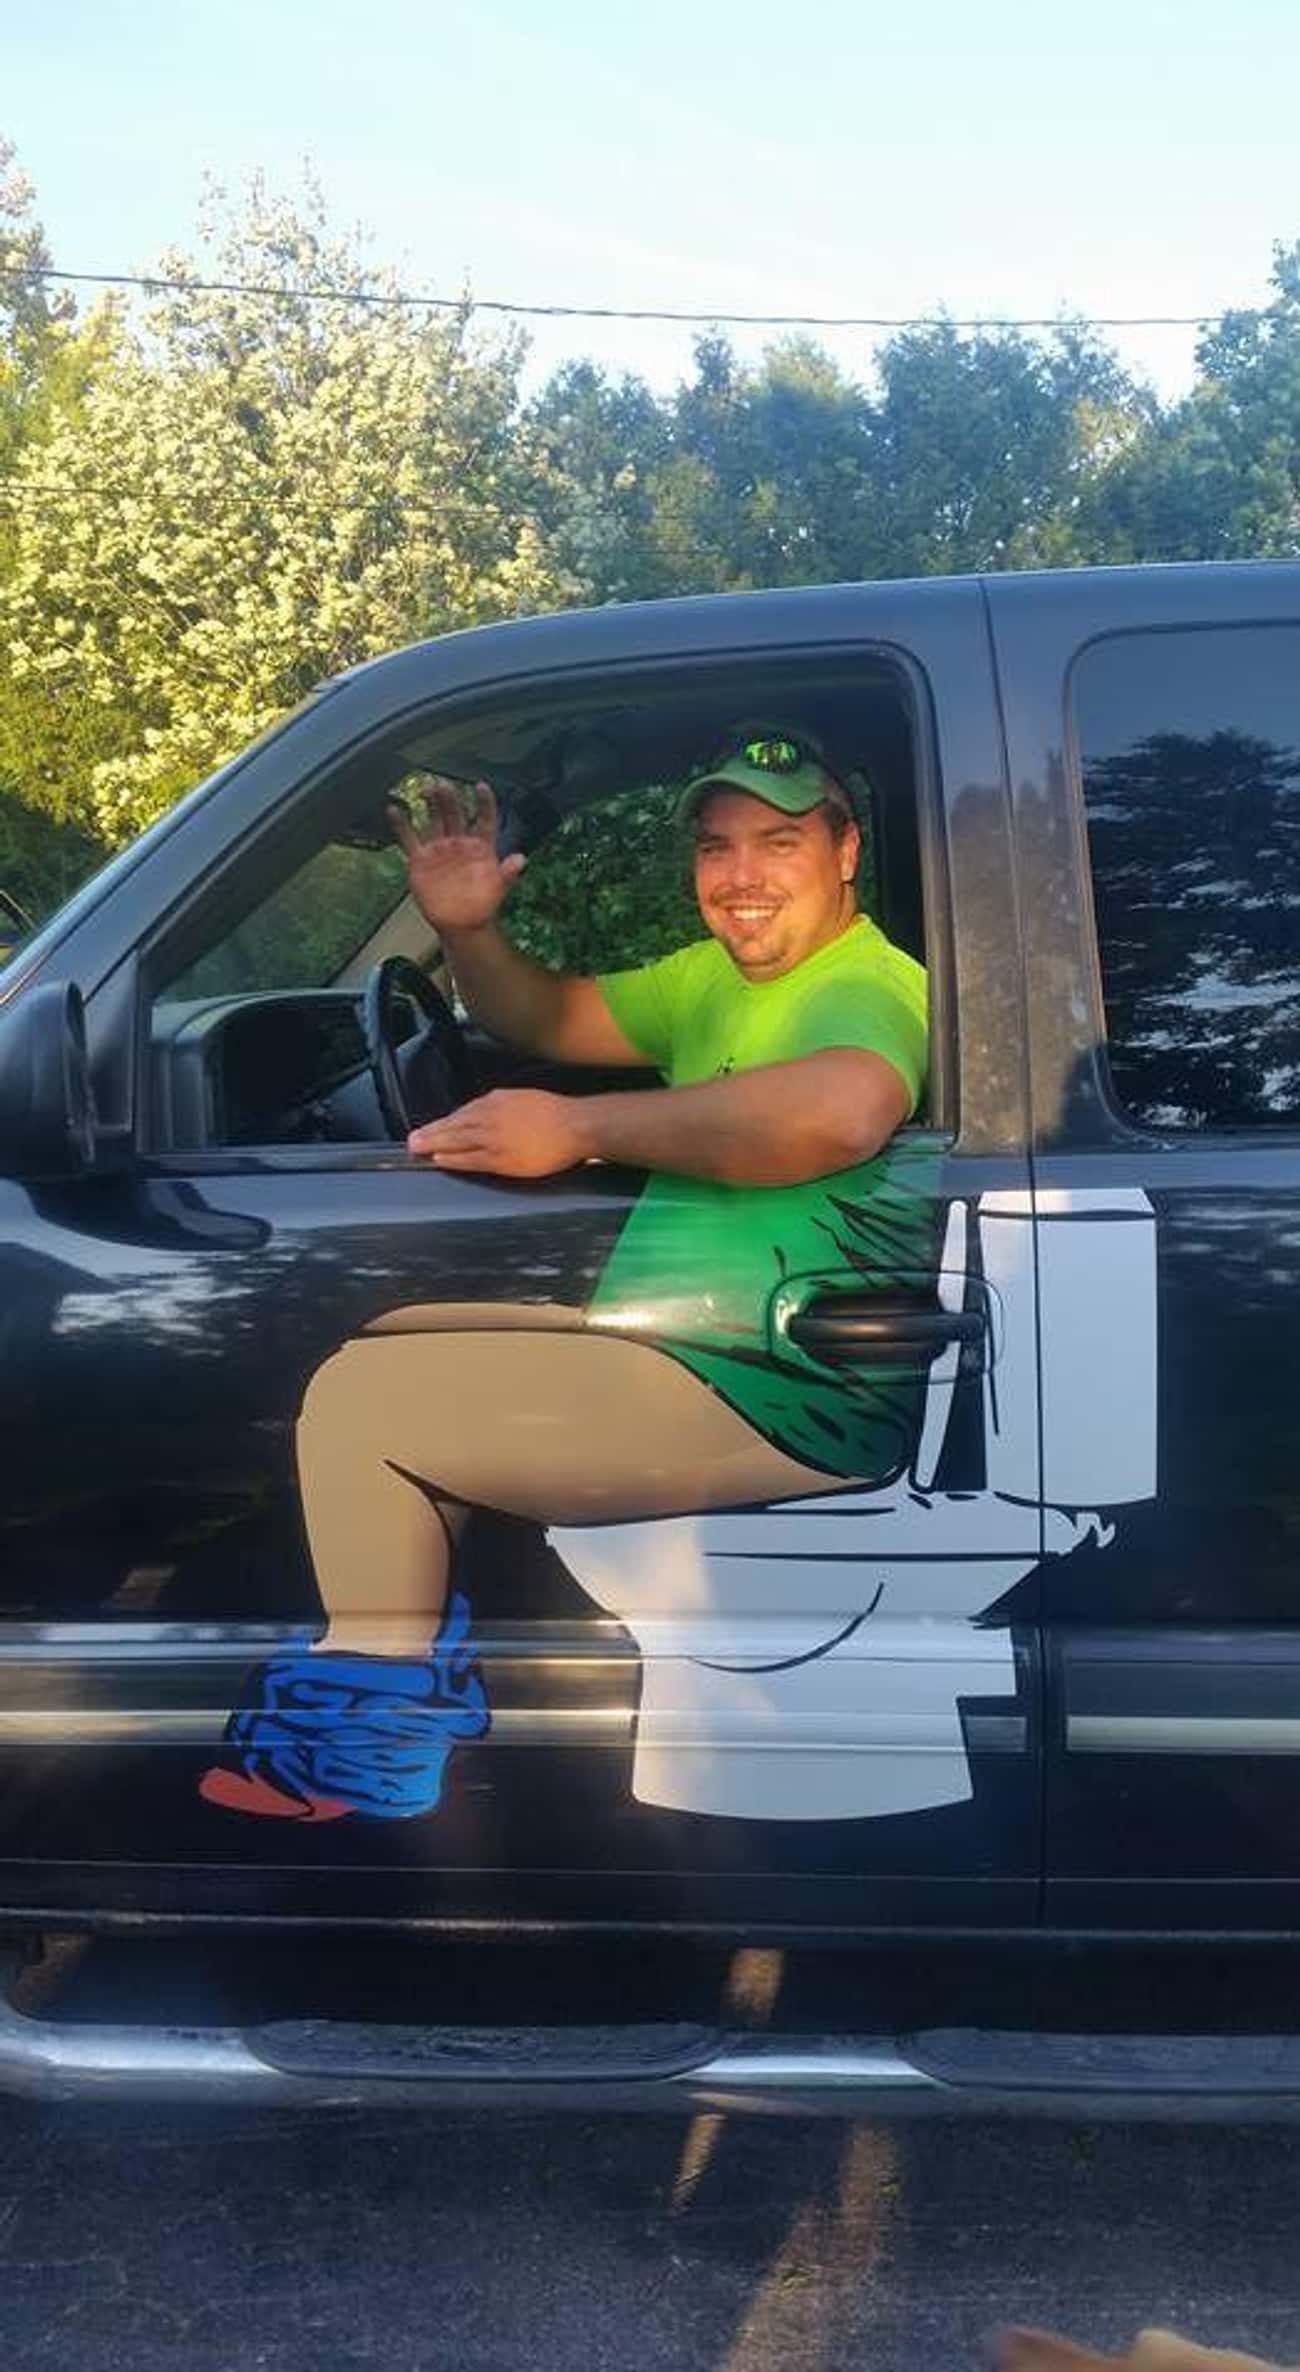 This Plumber Rocks The Best Decal Ever